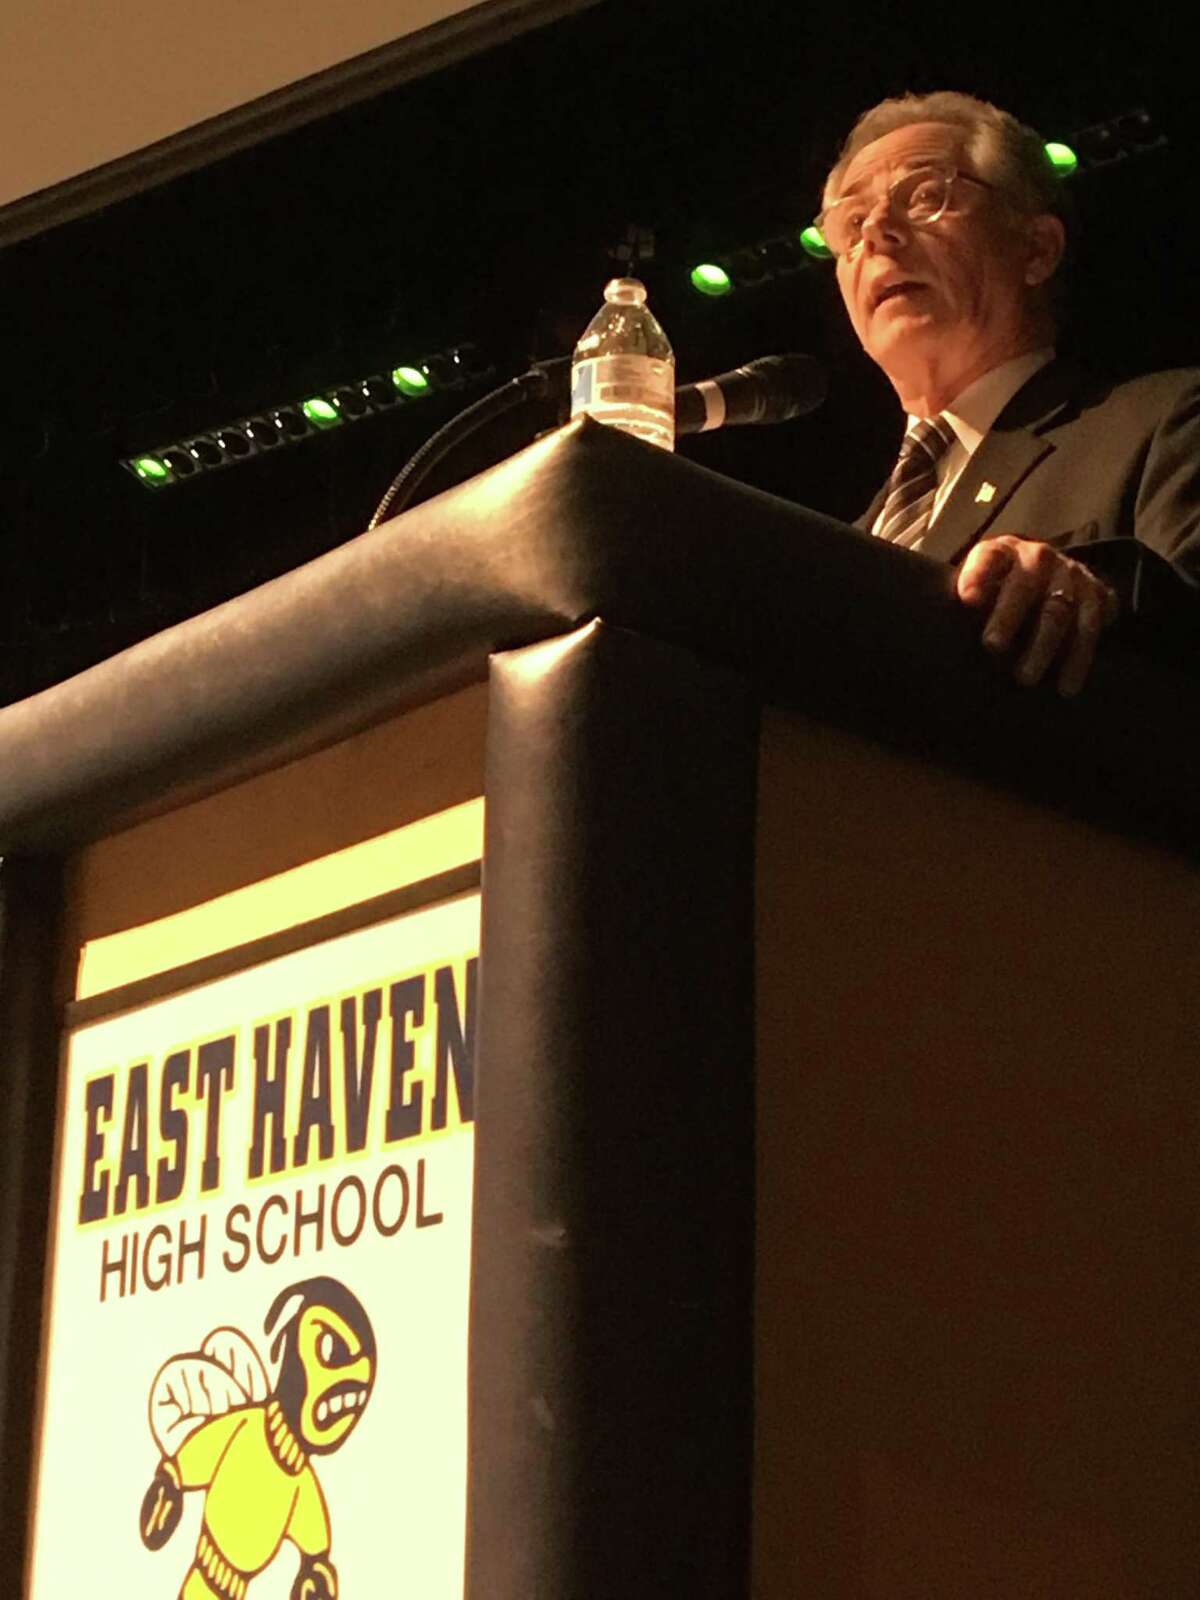 East Haven Mayor Joseph Maturo Jr. presents his recommended fiscal 2019-2020 budget to the Town Council and gives his annual State of the Town address in the East Haven High School auditorium on Thursday, March 28, 2019.